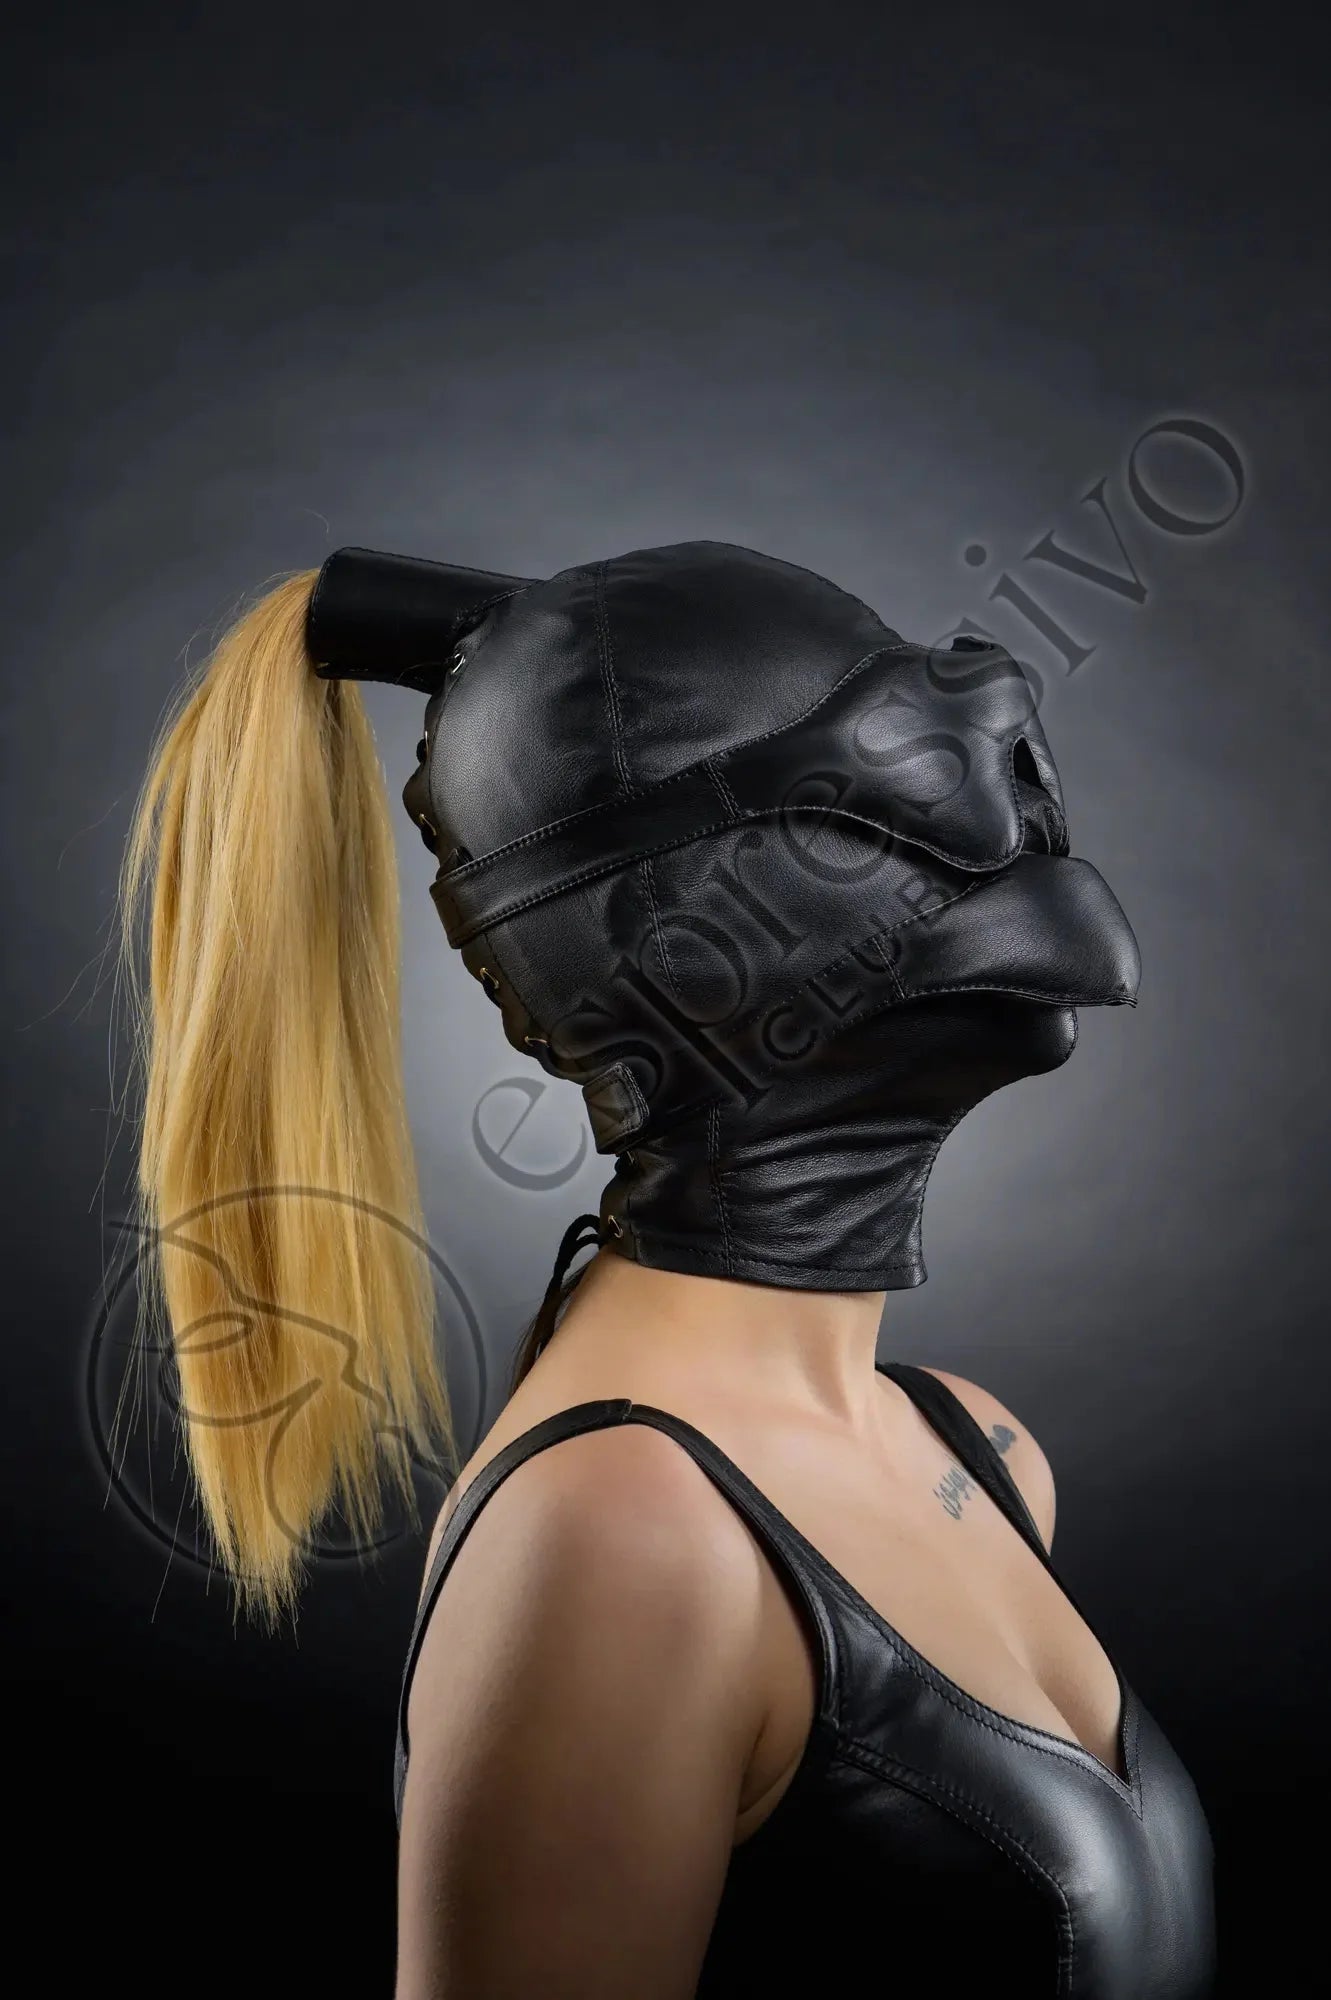 Real Leather BDSM Tight Ponytail Hood with Blindfold & Muffle Gag Mask - Muffle Gag on, Side View